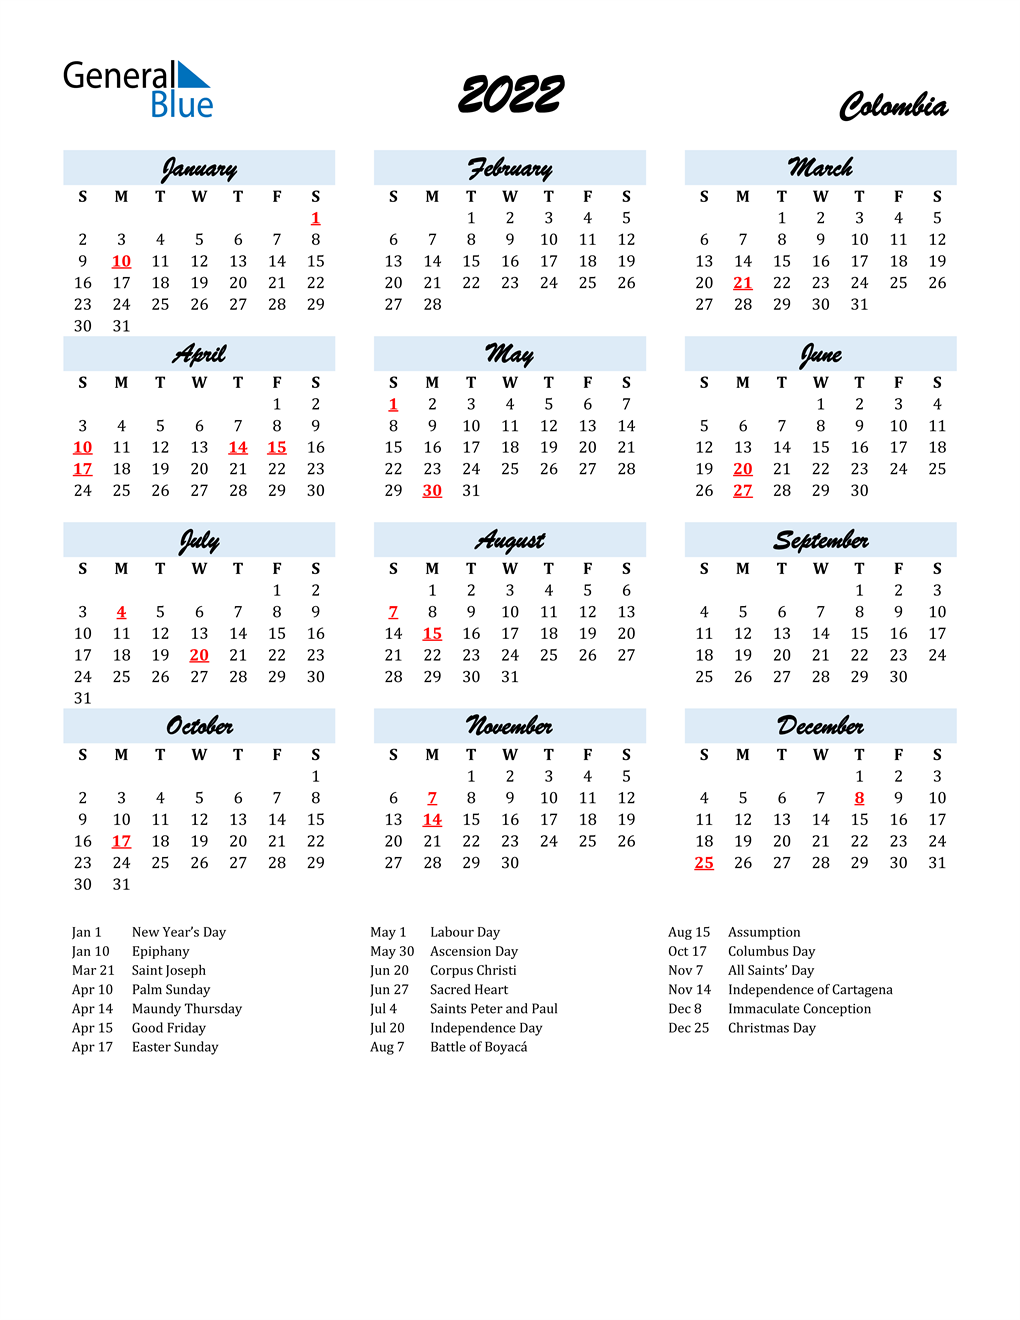 Colombia Calendar 2022 2022 Colombia Calendar With Holidays